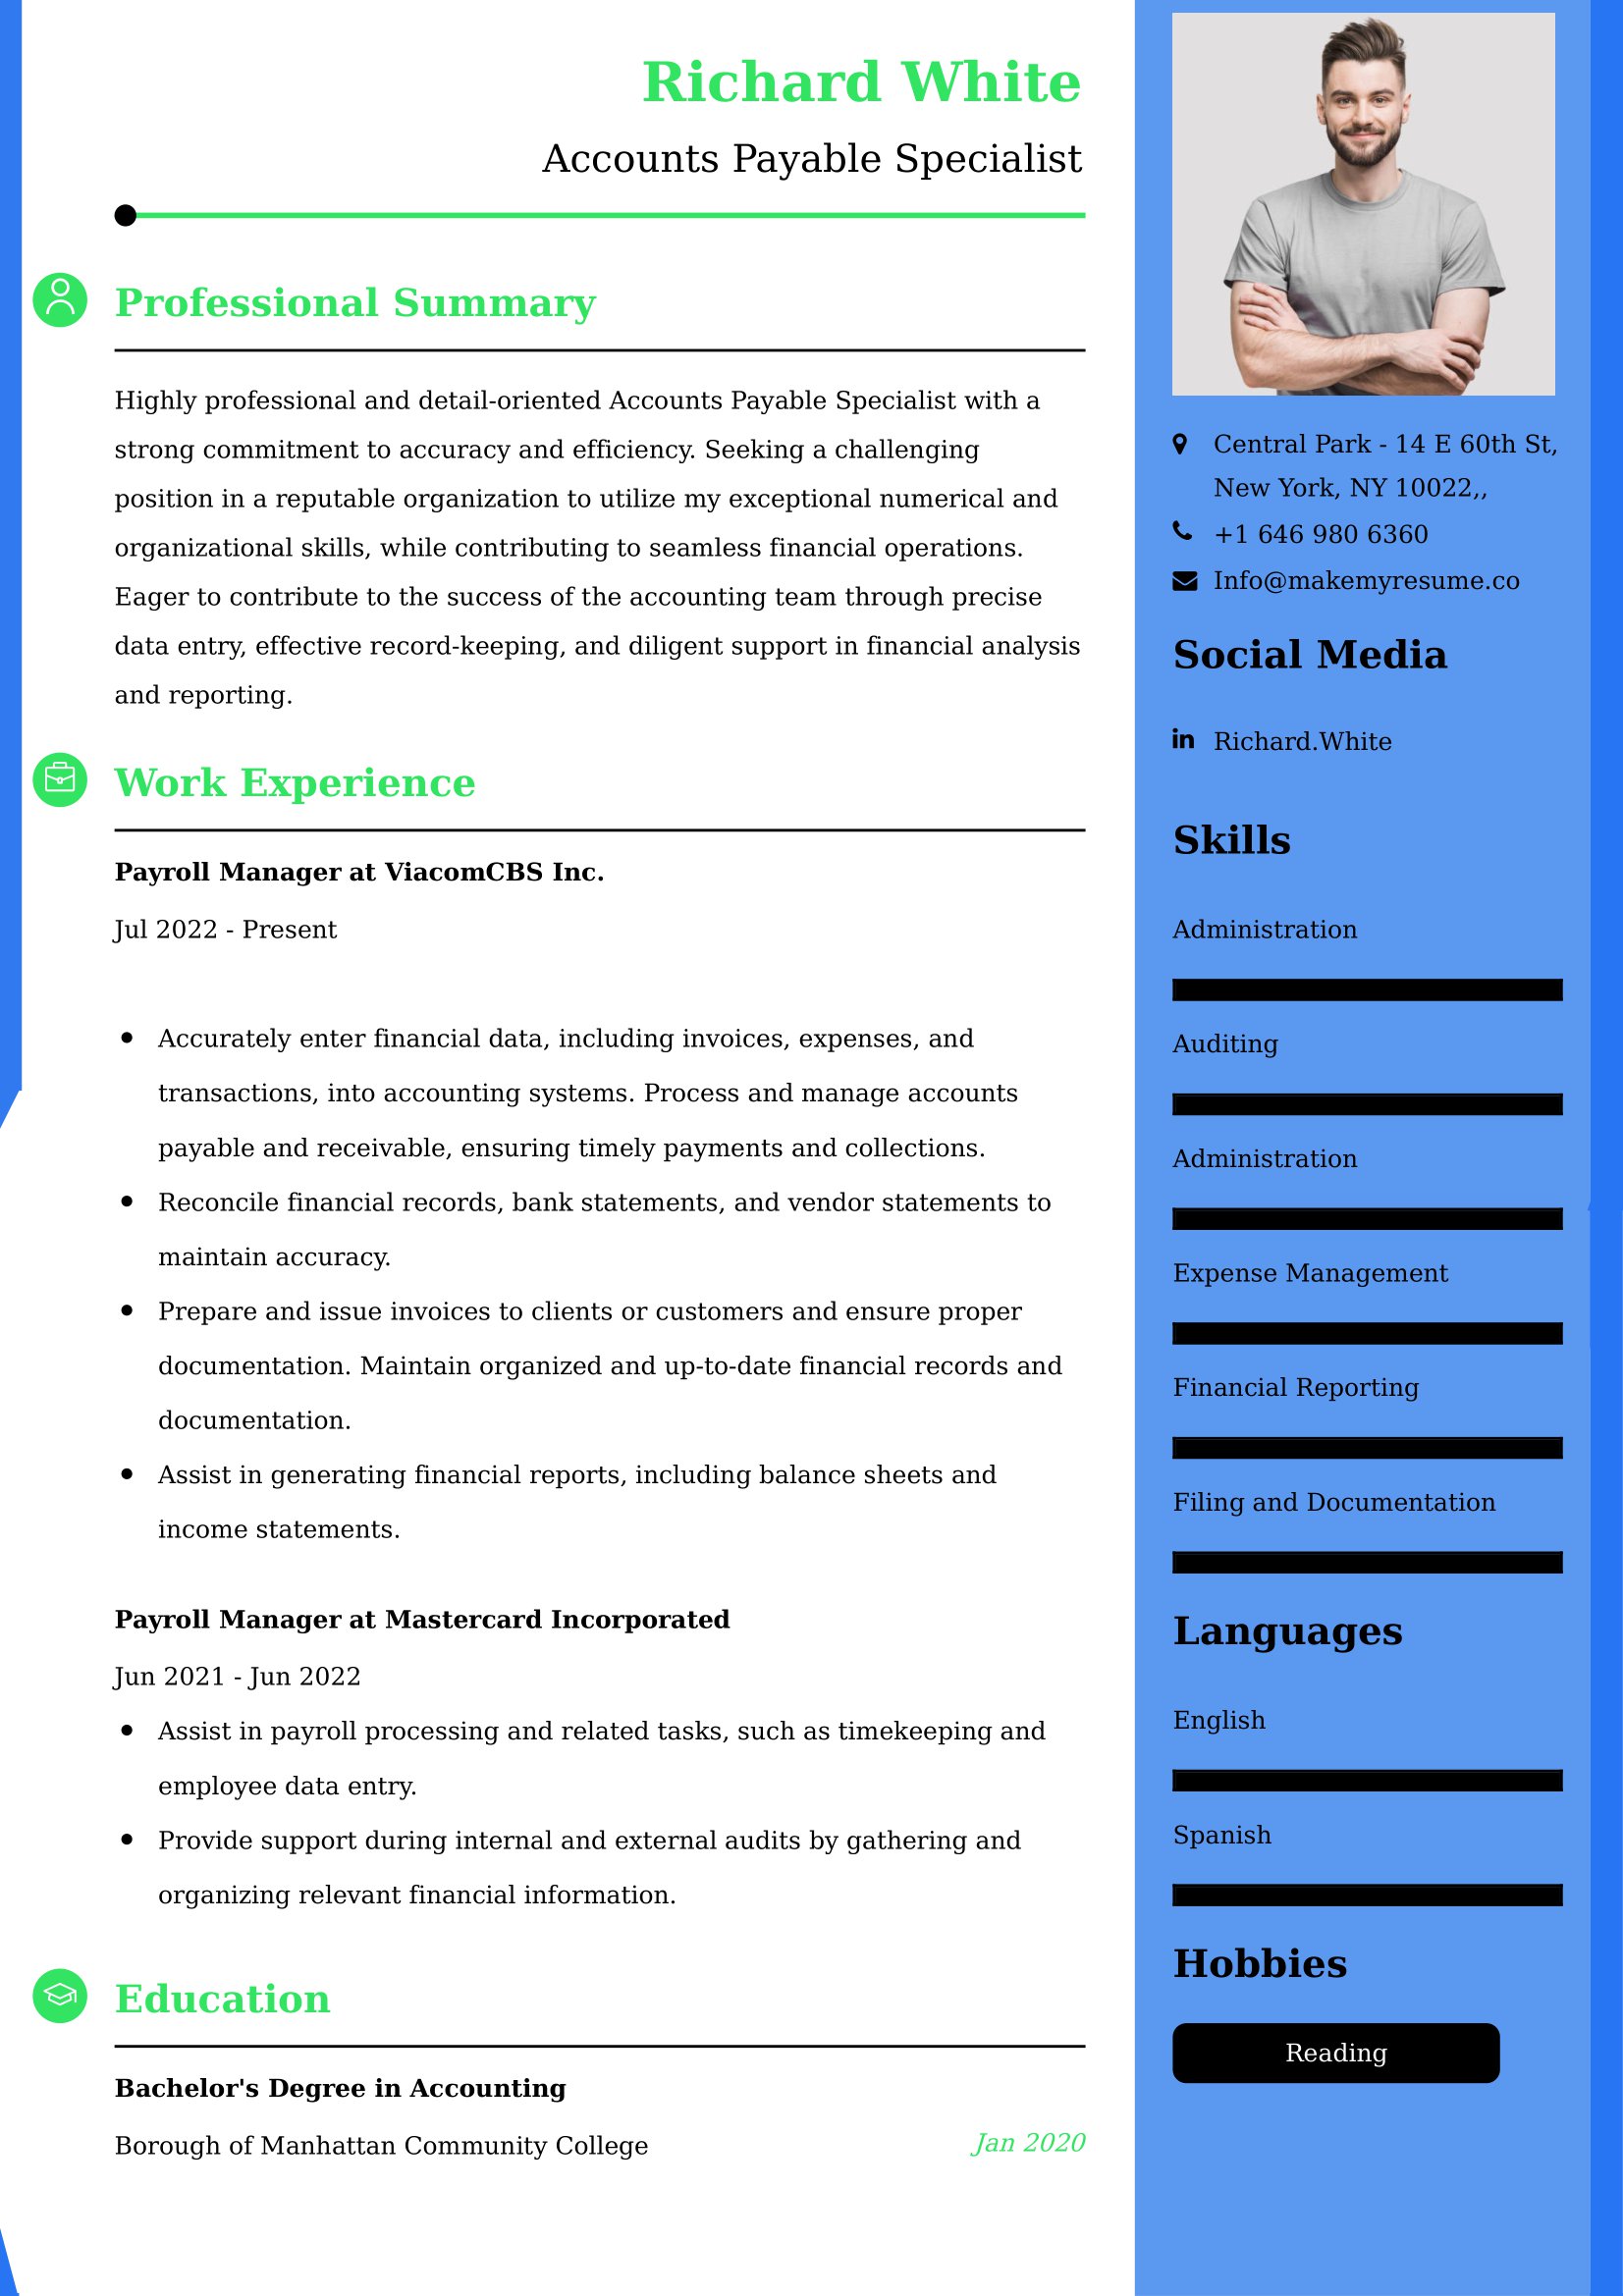 Accounts Payable Specialist Resume Examples - Brazilian Format, Latest Template